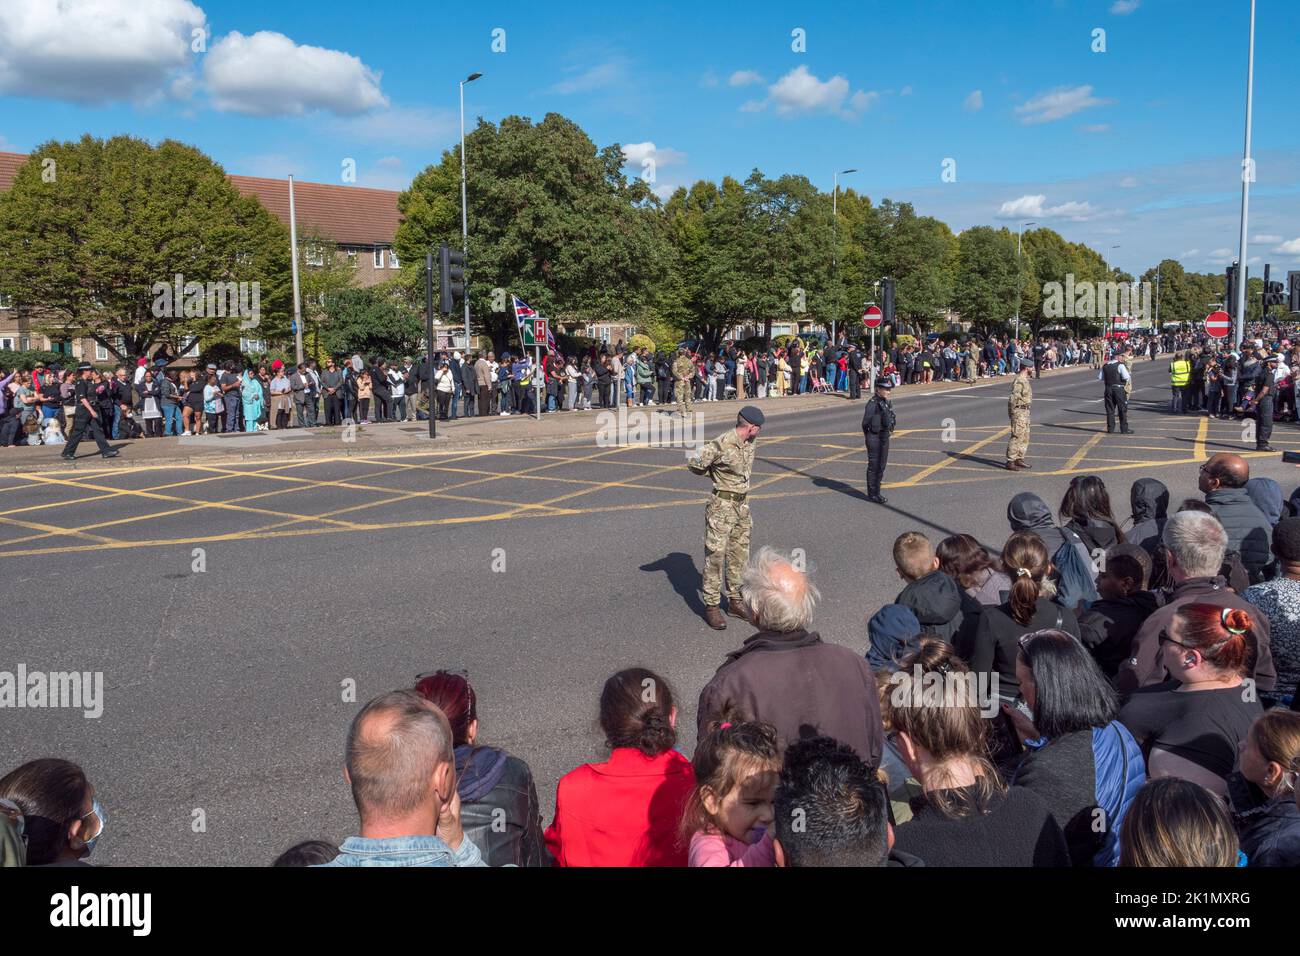 People waiting for the hearse containing Queen Elizabeth II on her way to being buried in St Georges Chapel, Windosor Castle, UK.. Stock Photo